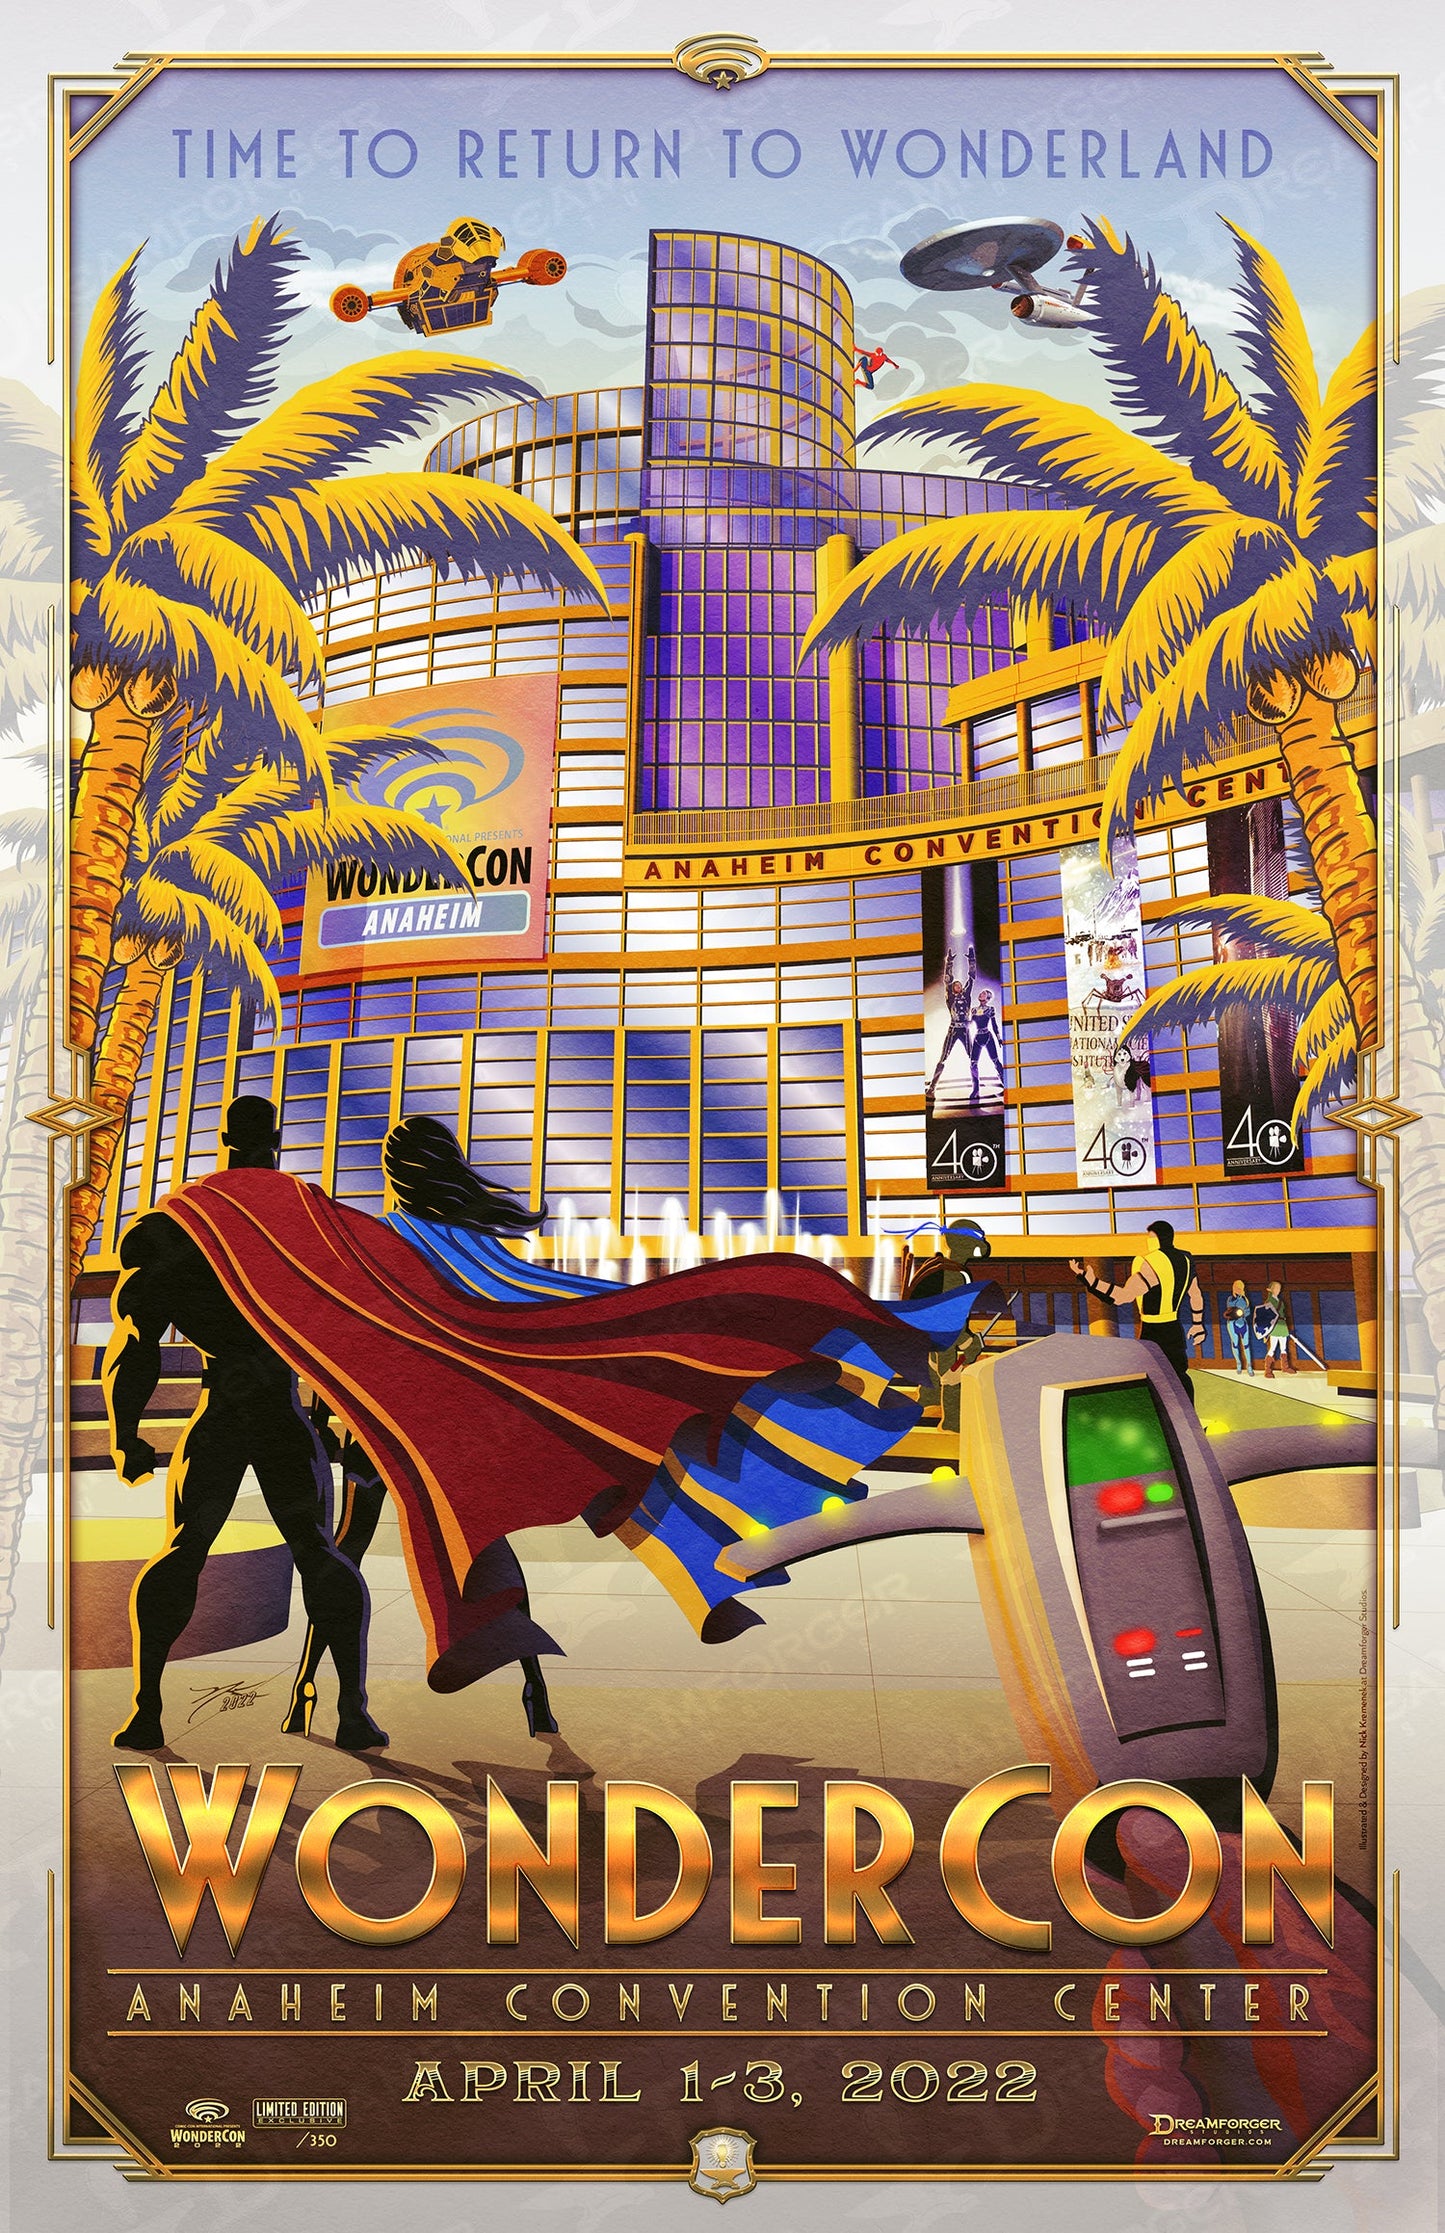 San Diego Comic-Con 2022 Limited Edition Travel Poster